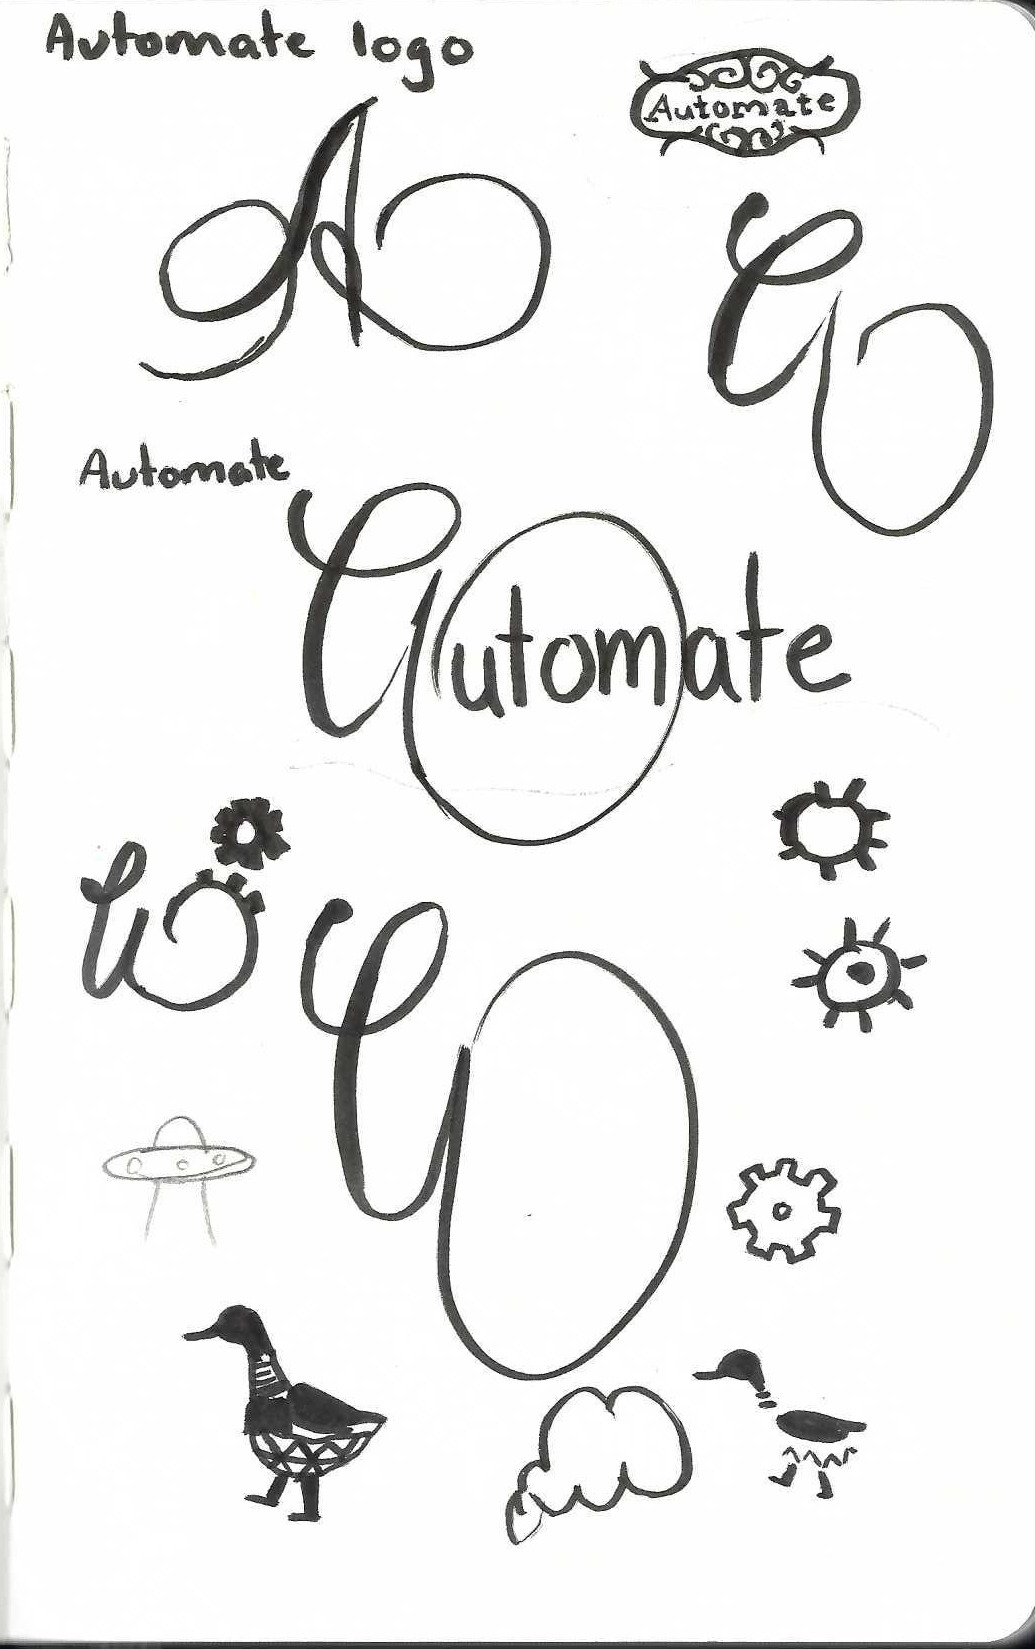 Logo sketches for Automate